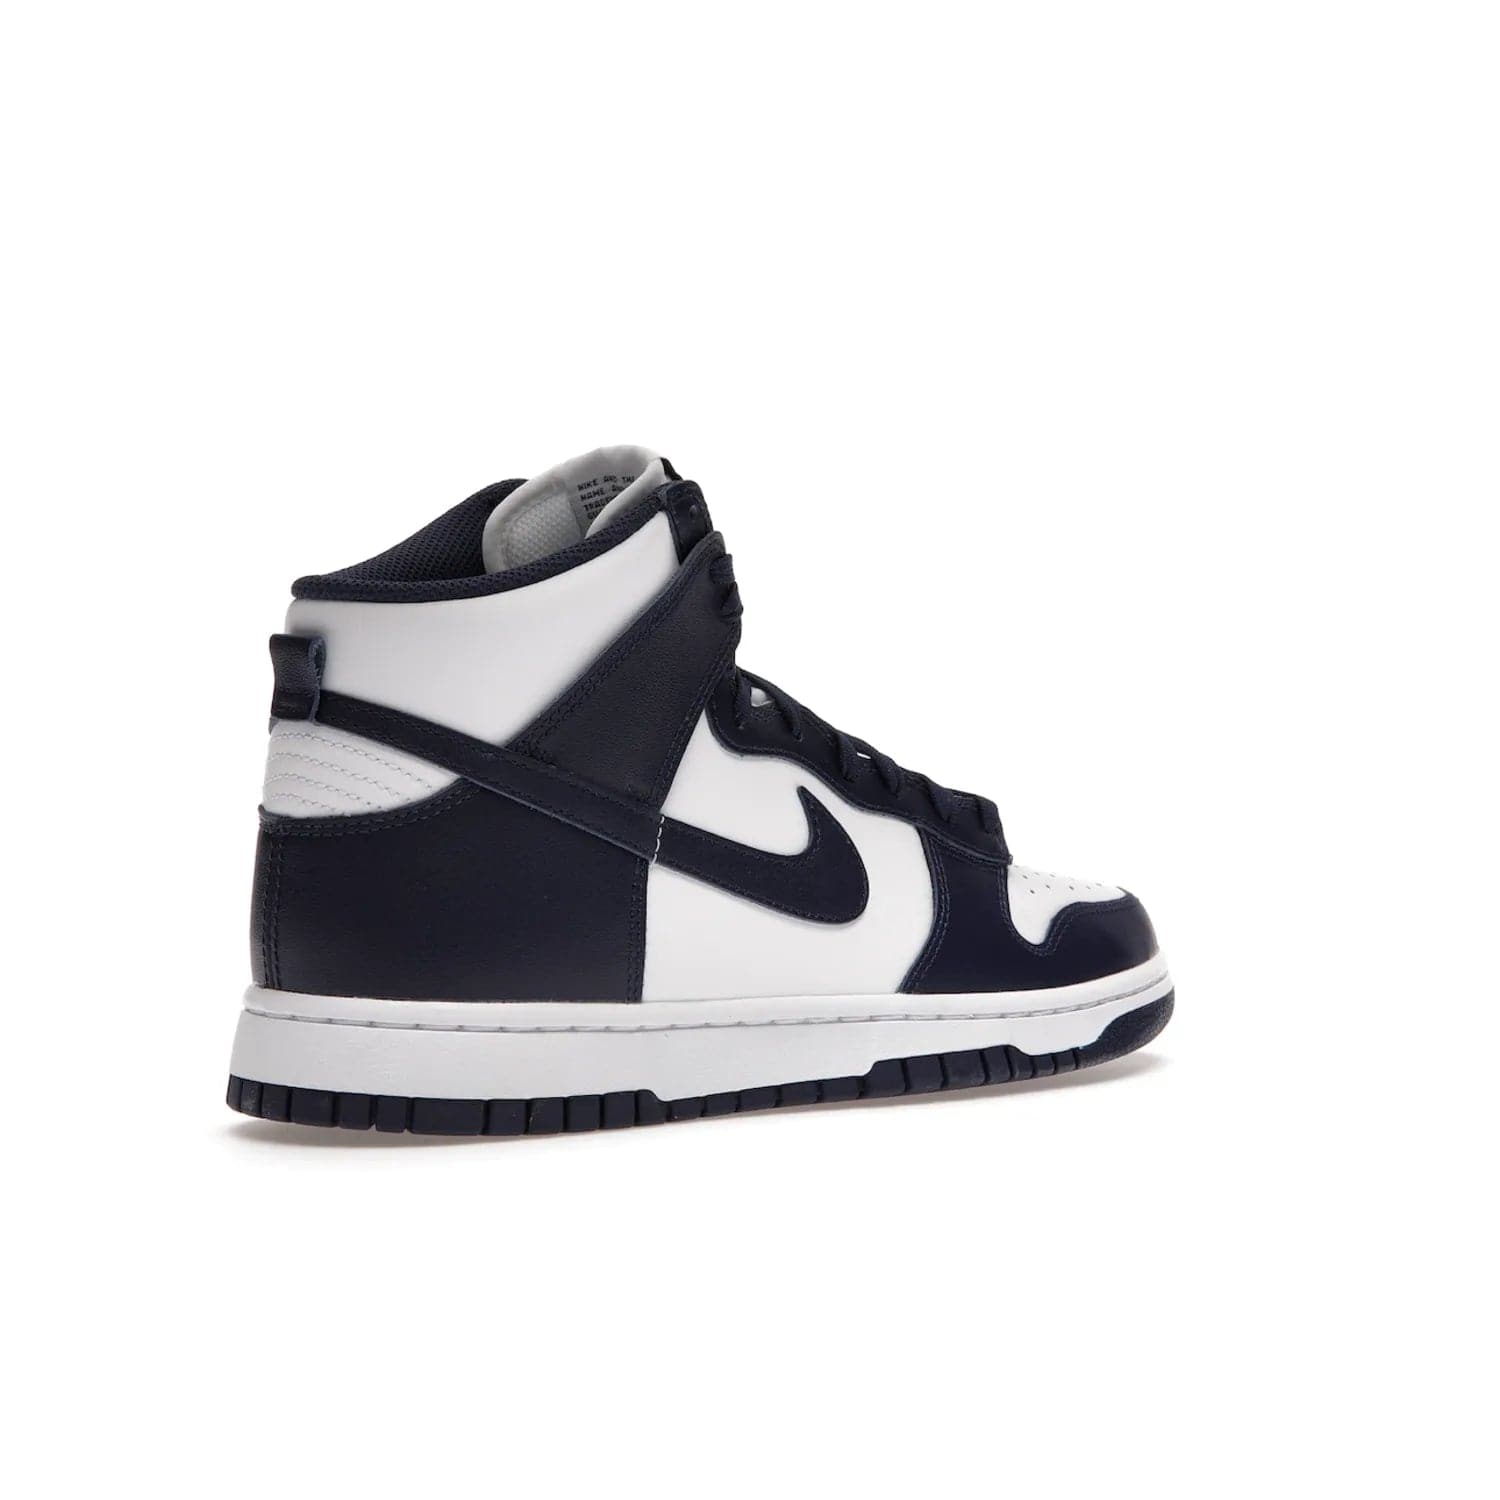 Nike Dunk High Championship Navy - Image 33 - Only at www.BallersClubKickz.com - Classic athletic style meets striking color-blocking on the Nike Dunk High Championship Navy. A white leather upper with Championship Navy overlays creates a retro look with a woven tongue label and sole. Unleash your inner champion with the Nike Dunk High Championship Navy.